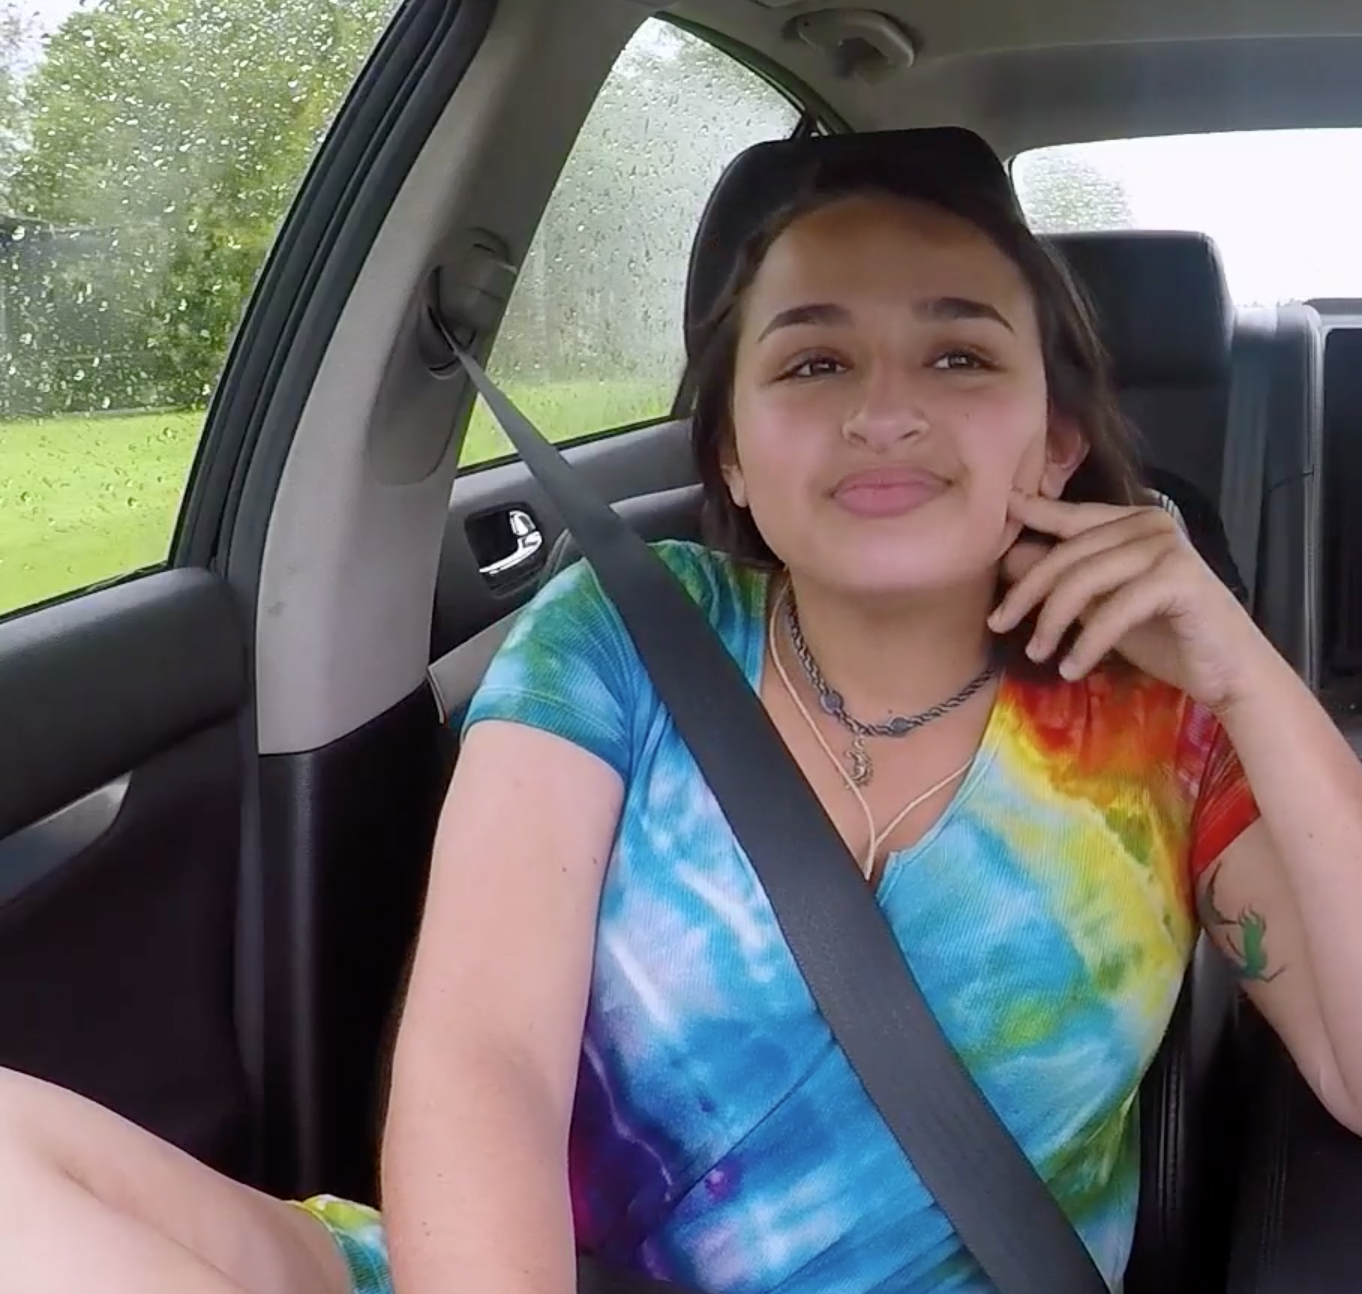 Jazz Jennings Says She's 'On Track' to Undergo Gender Confirmation Surgery